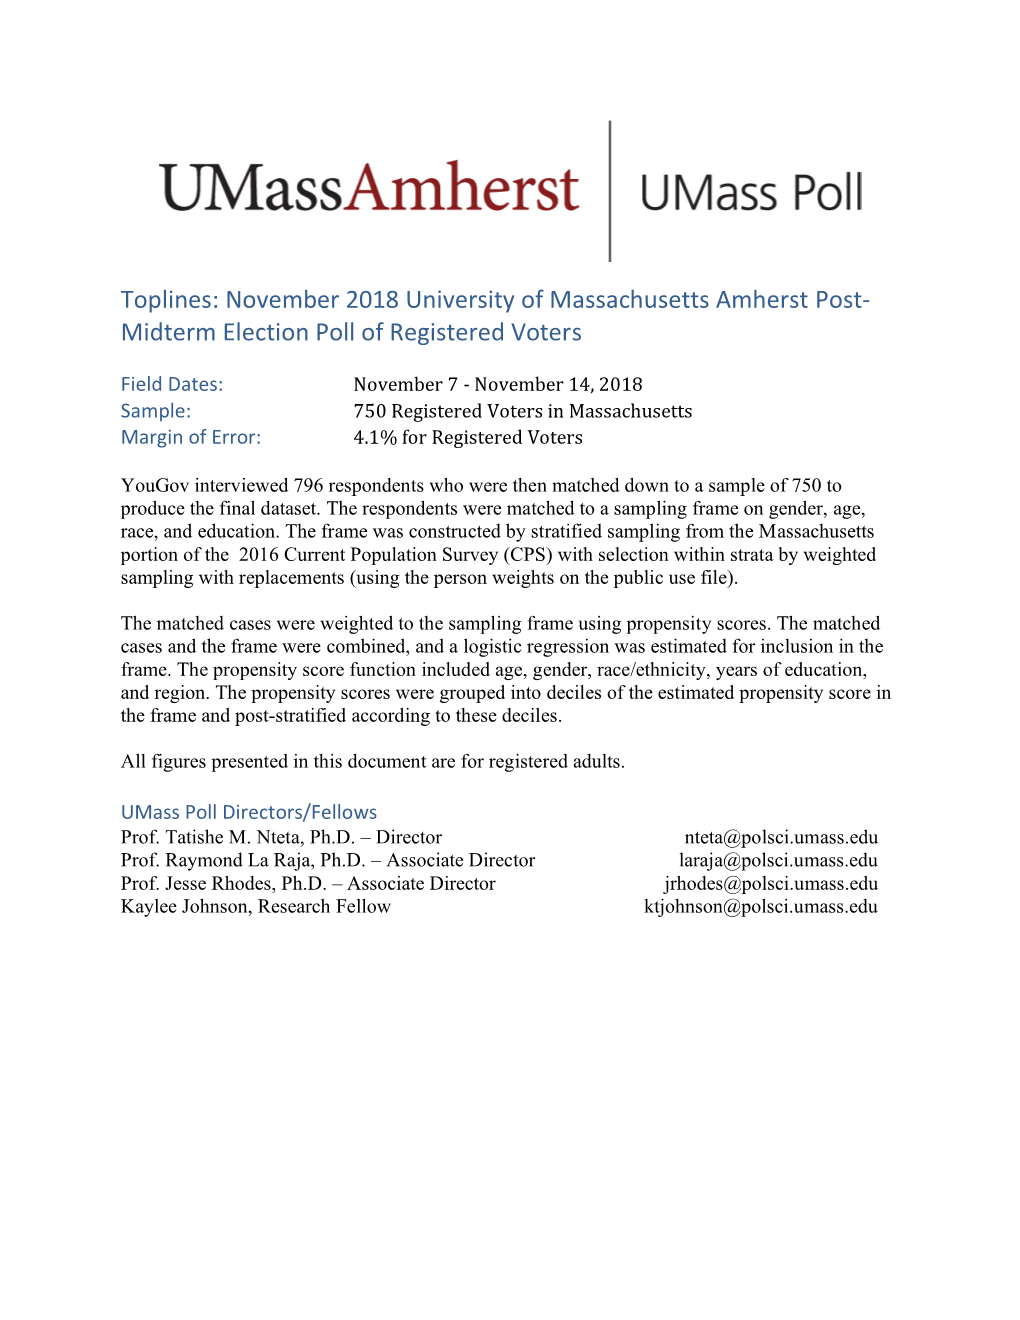 Midterm Election Poll of Registered Voters